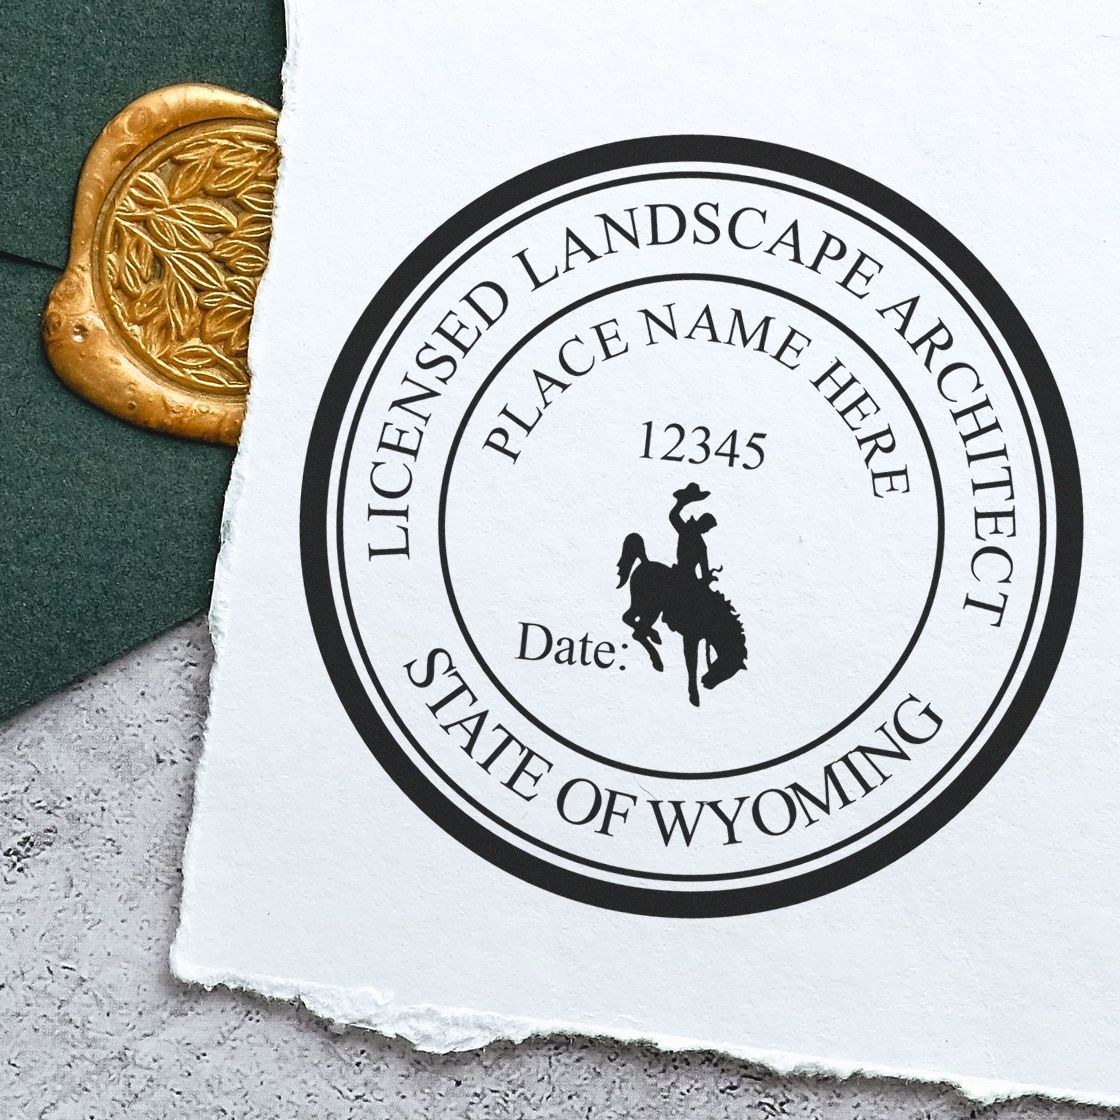 Premium MaxLight Pre-Inked Wyoming Landscape Architectural Stamp in use photo showing a stamped imprint of the Premium MaxLight Pre-Inked Wyoming Landscape Architectural Stamp